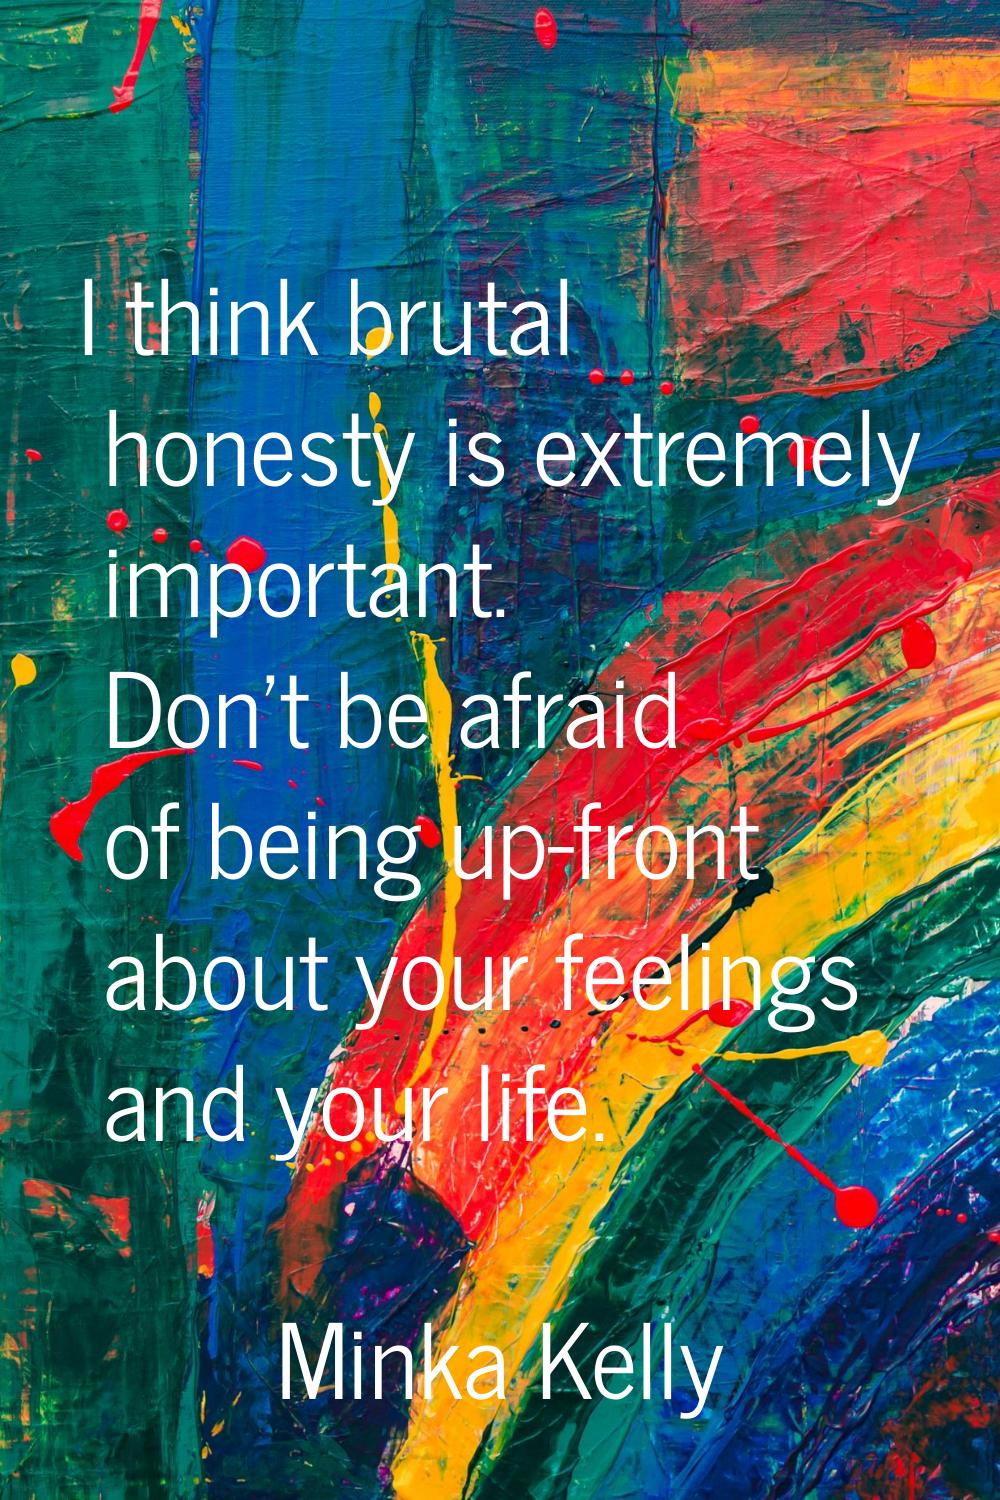 I think brutal honesty is extremely important. Don't be afraid of being up-front about your feeling